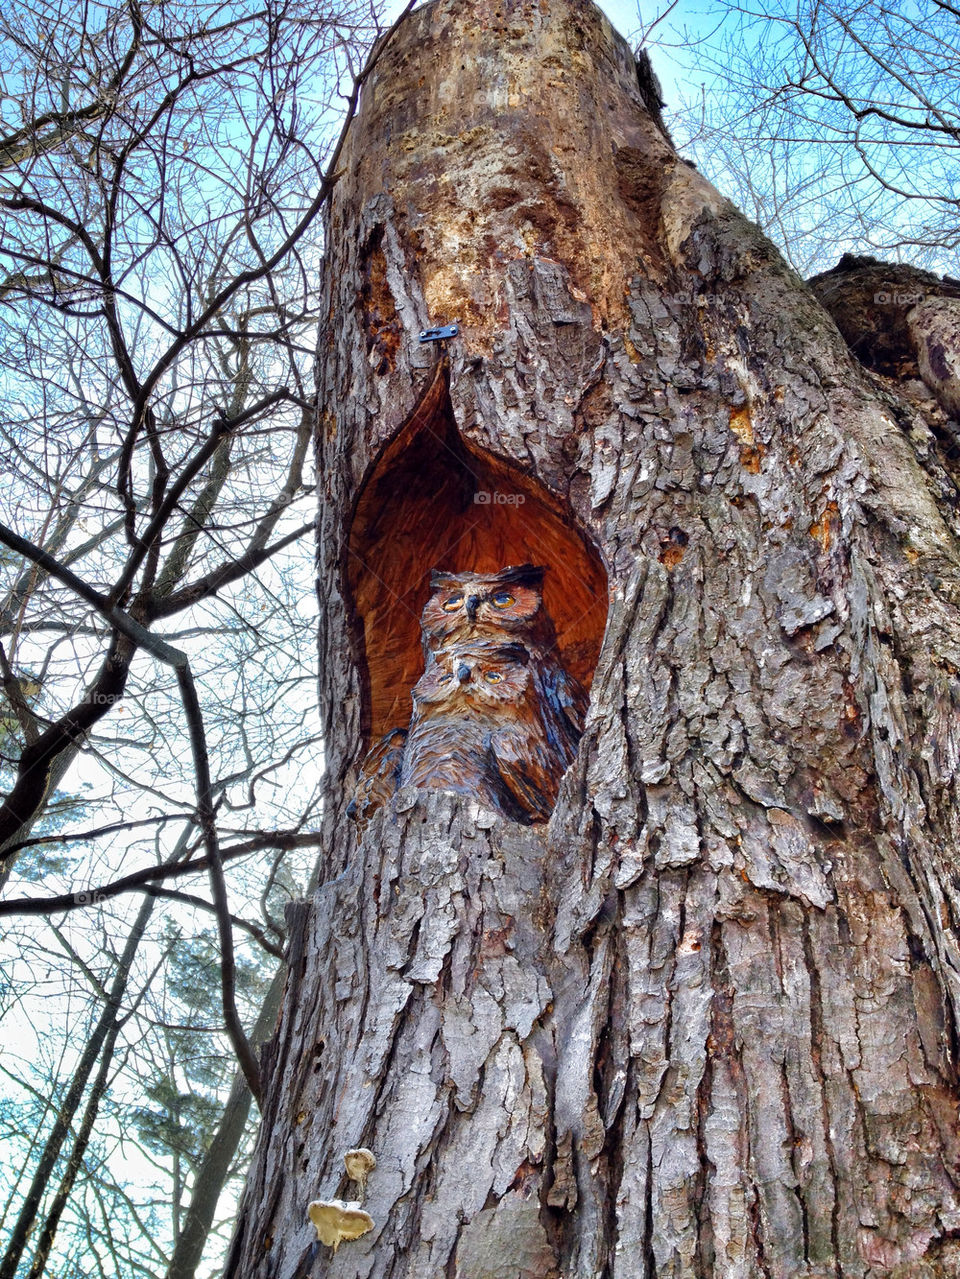 Low angle view of owl art in tree